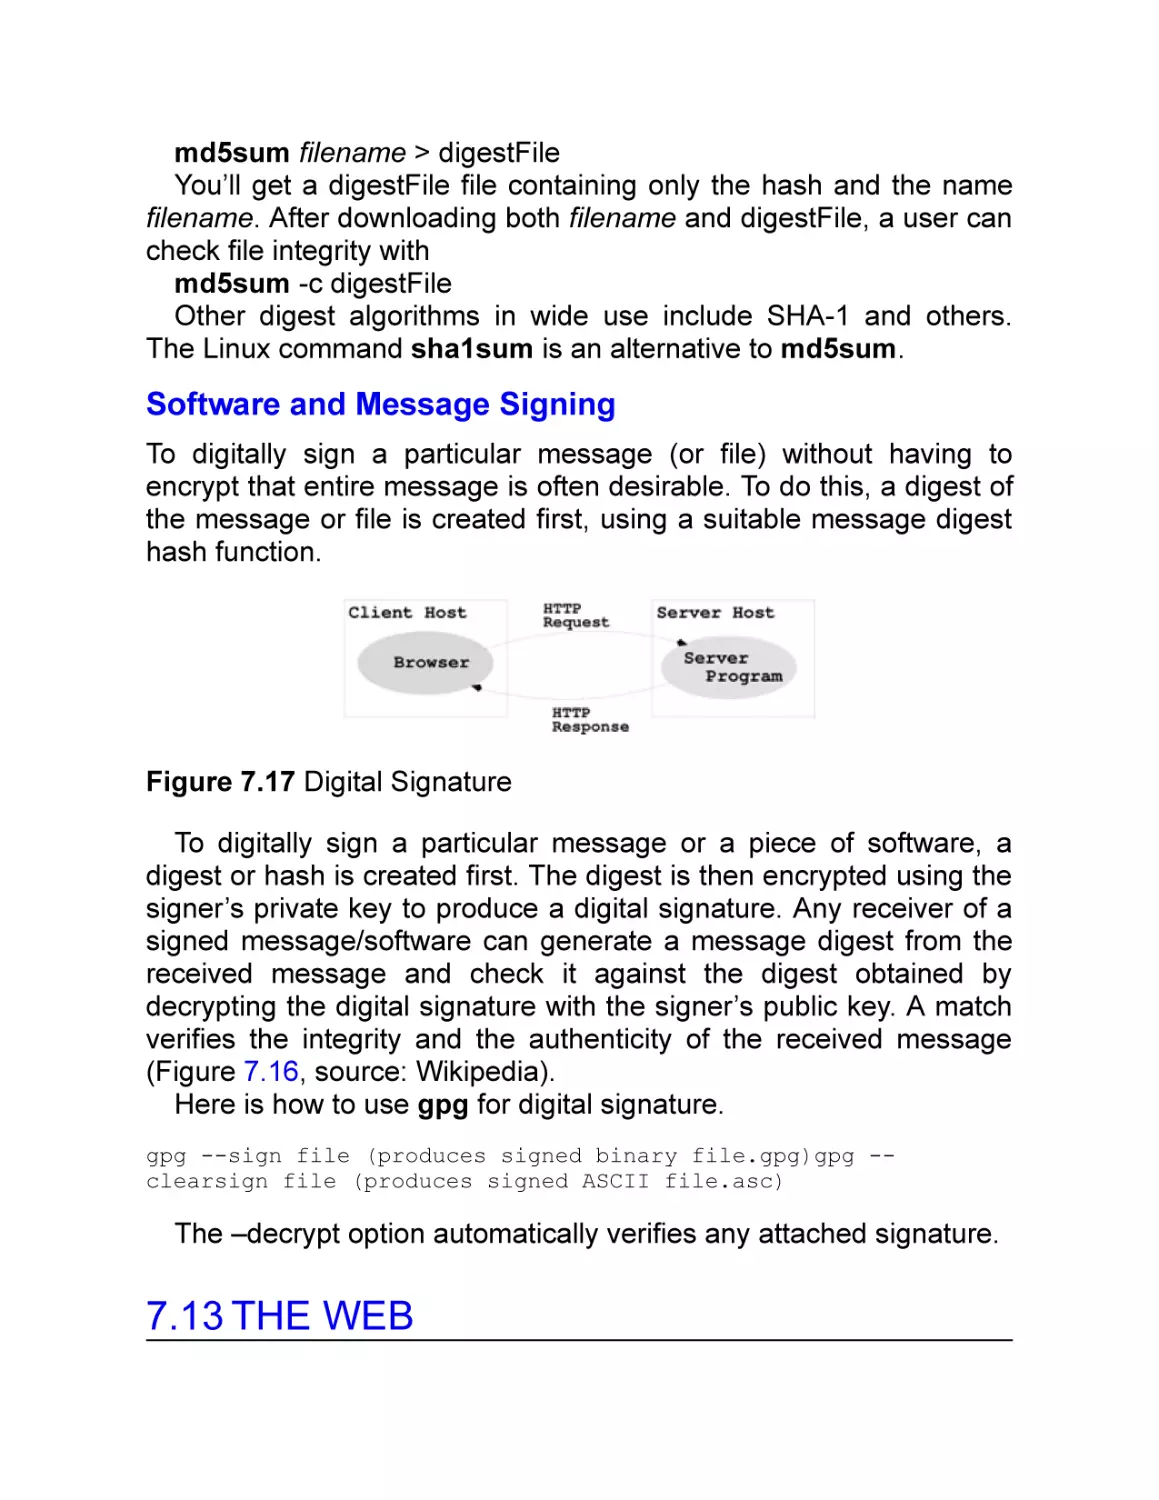 Software and Message Signing
7.13 The Web